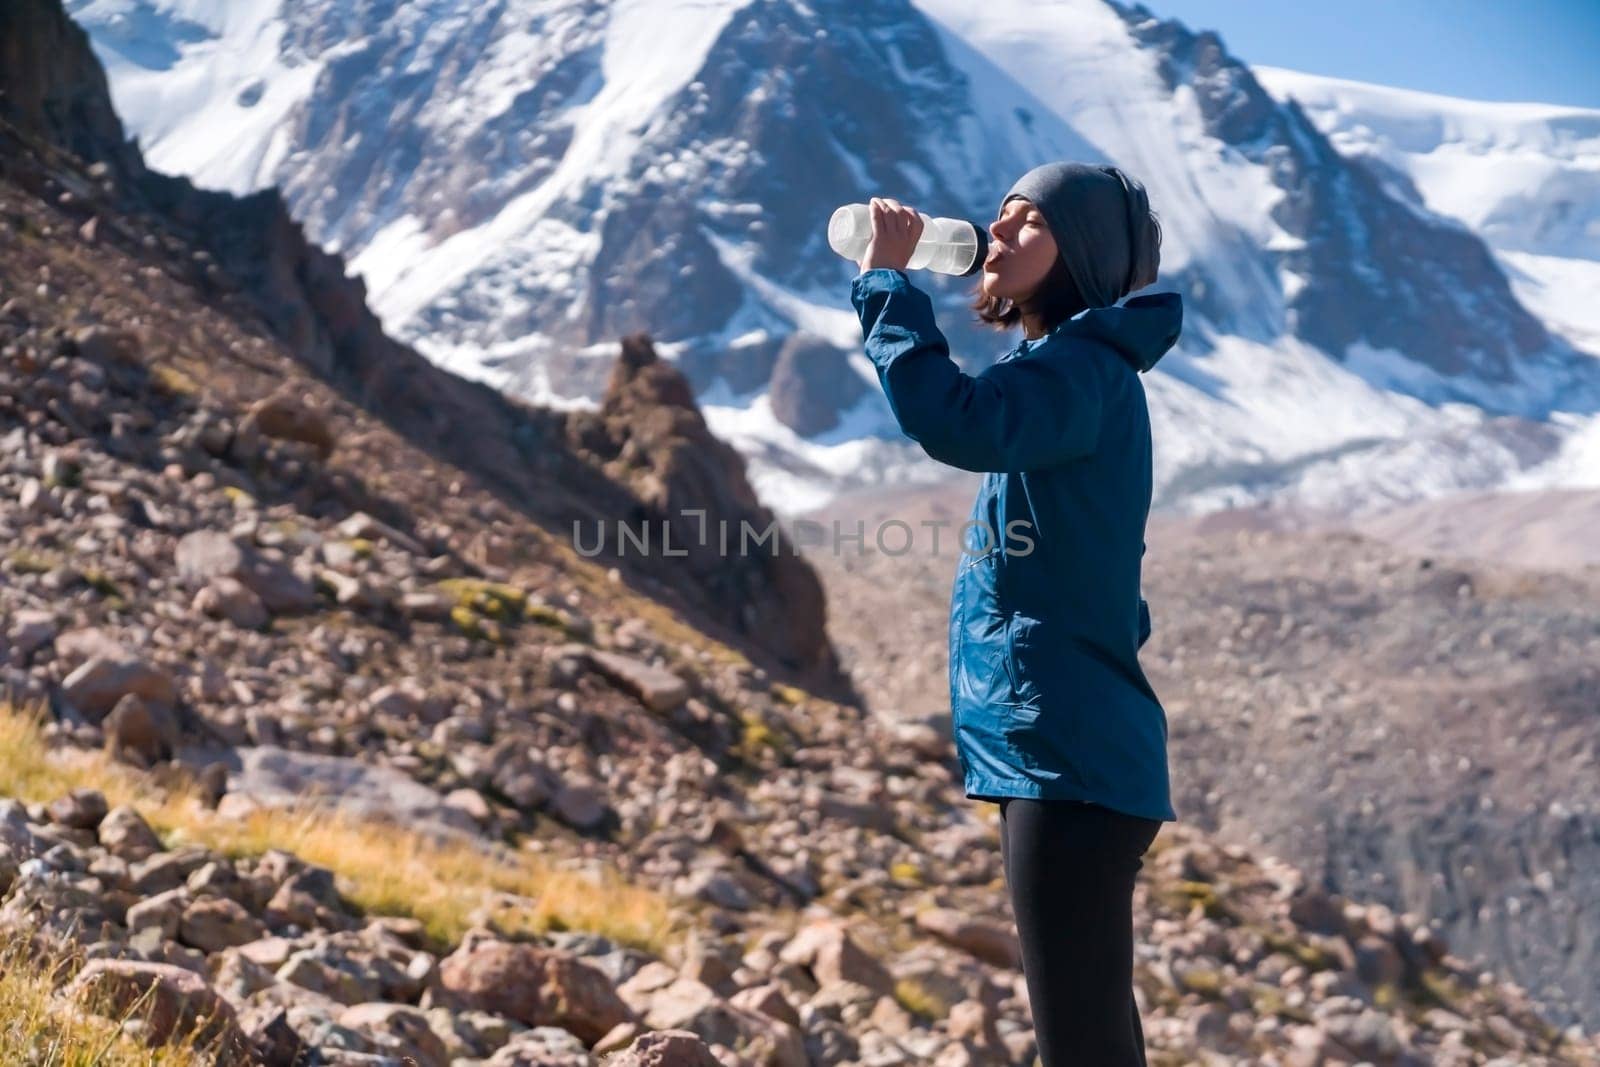 Young sports girl stands on the backdrop of a stunning view with snow-capped mountains and drinks clear water from a bottle. Woman is trail running, training, climbing and drinking isotonic.